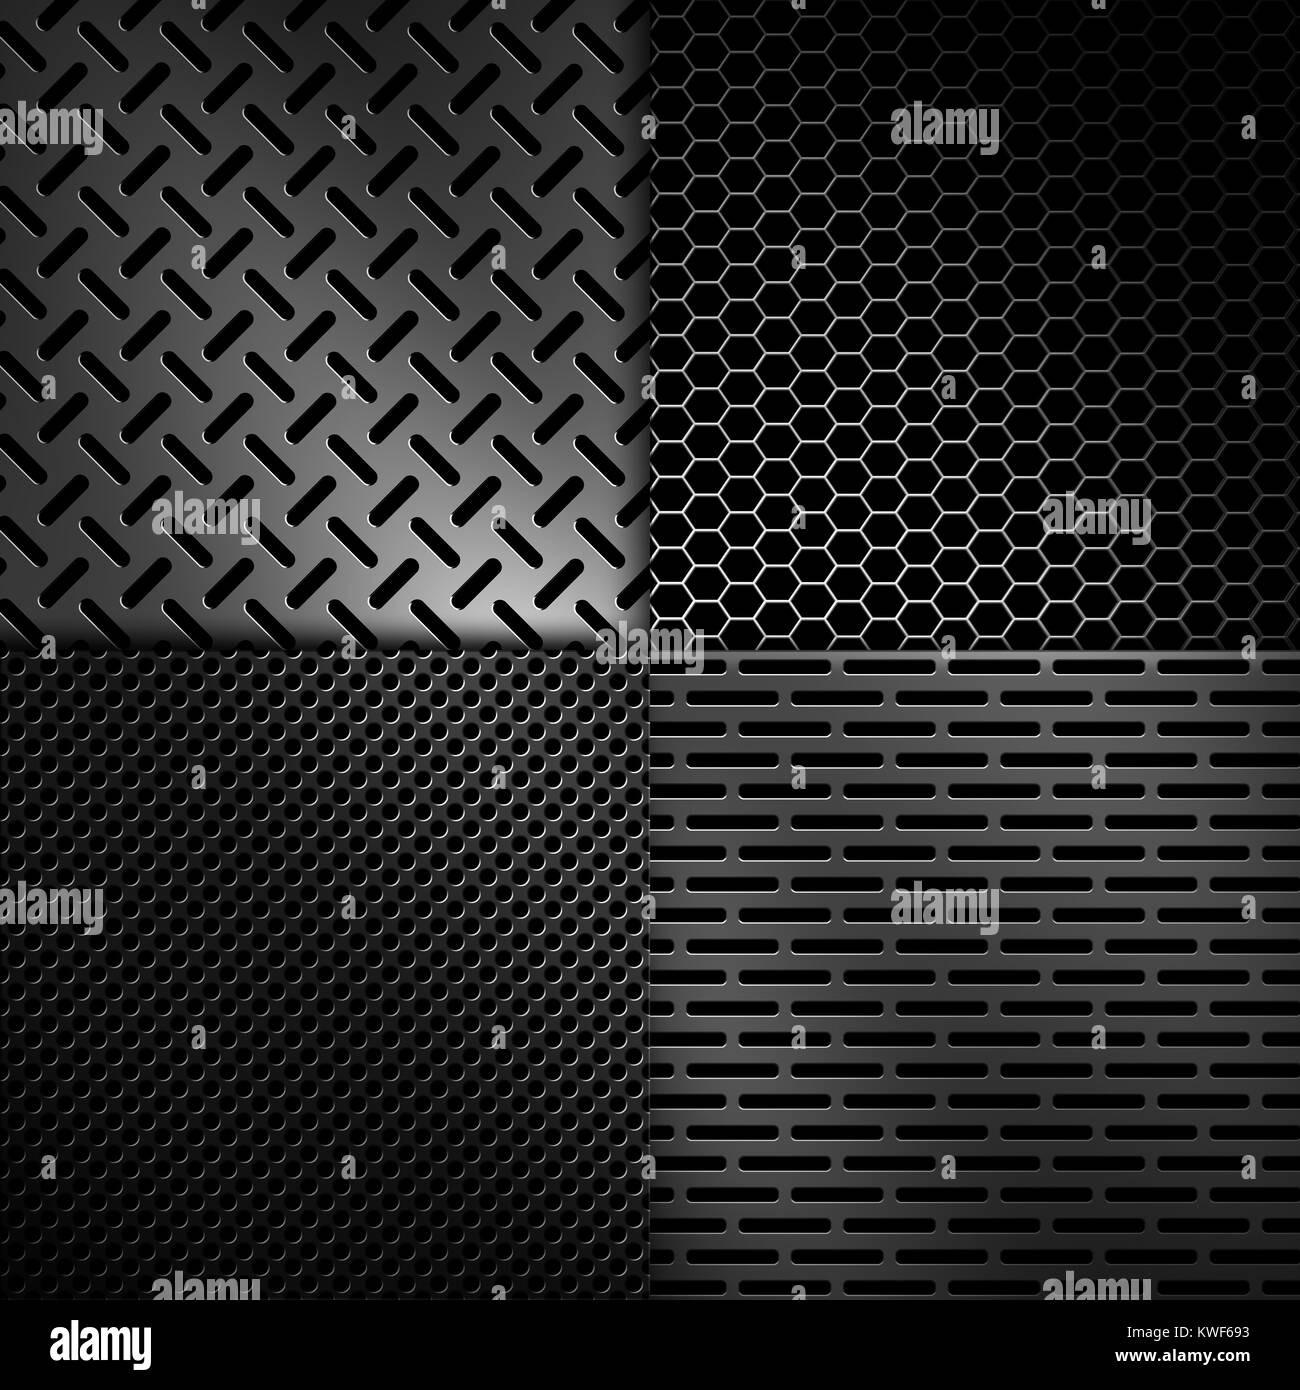 Four types of abstract modern grey perforated metal plate textures for background, wallpaper, graphic design Stock Photo